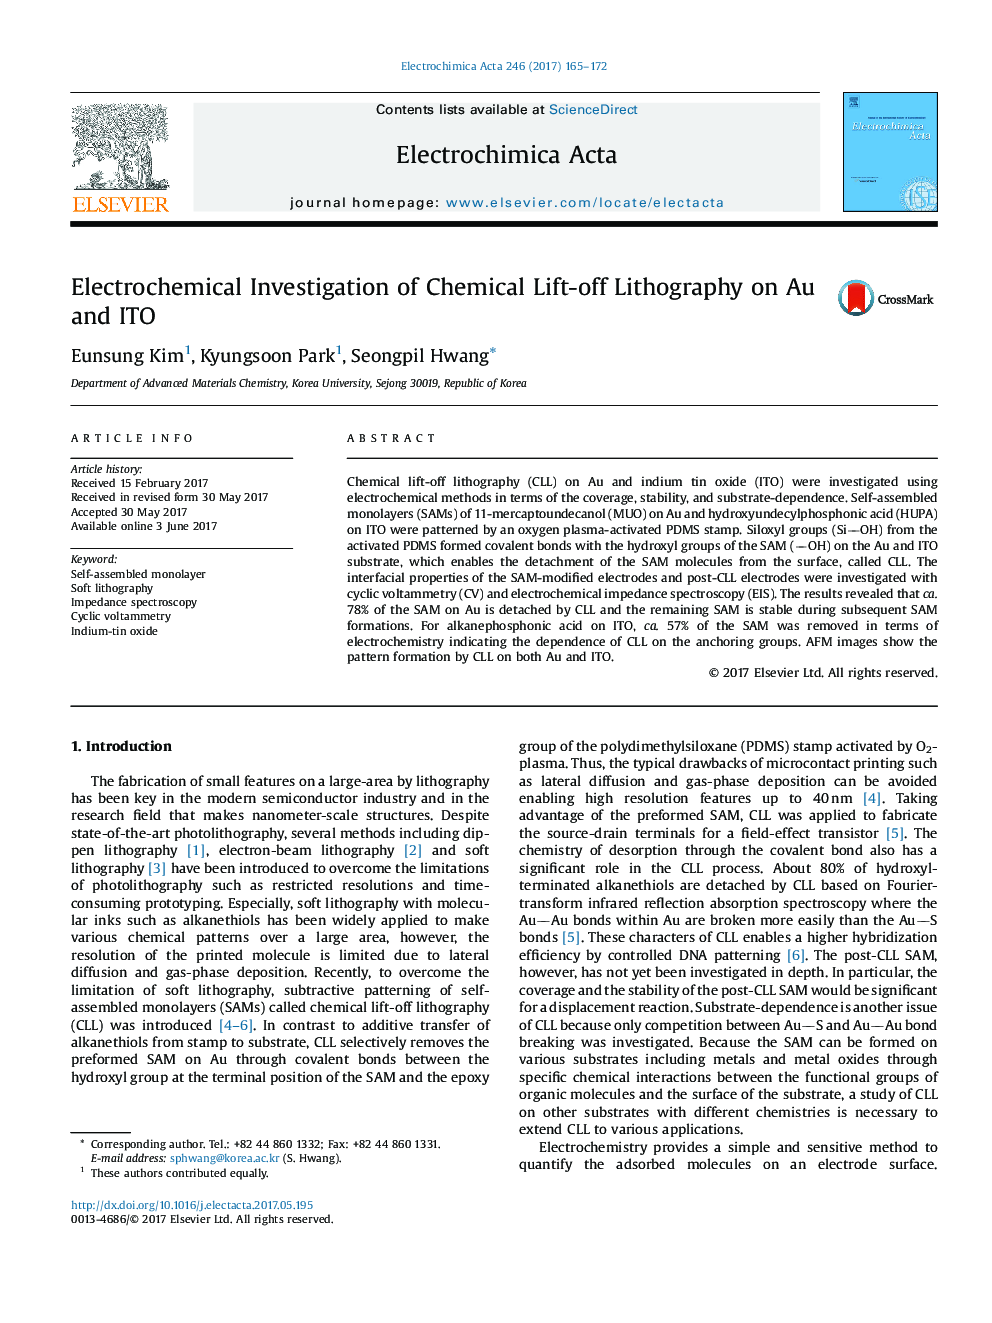 Electrochemical Investigation of Chemical Lift-off Lithography on Au and ITO